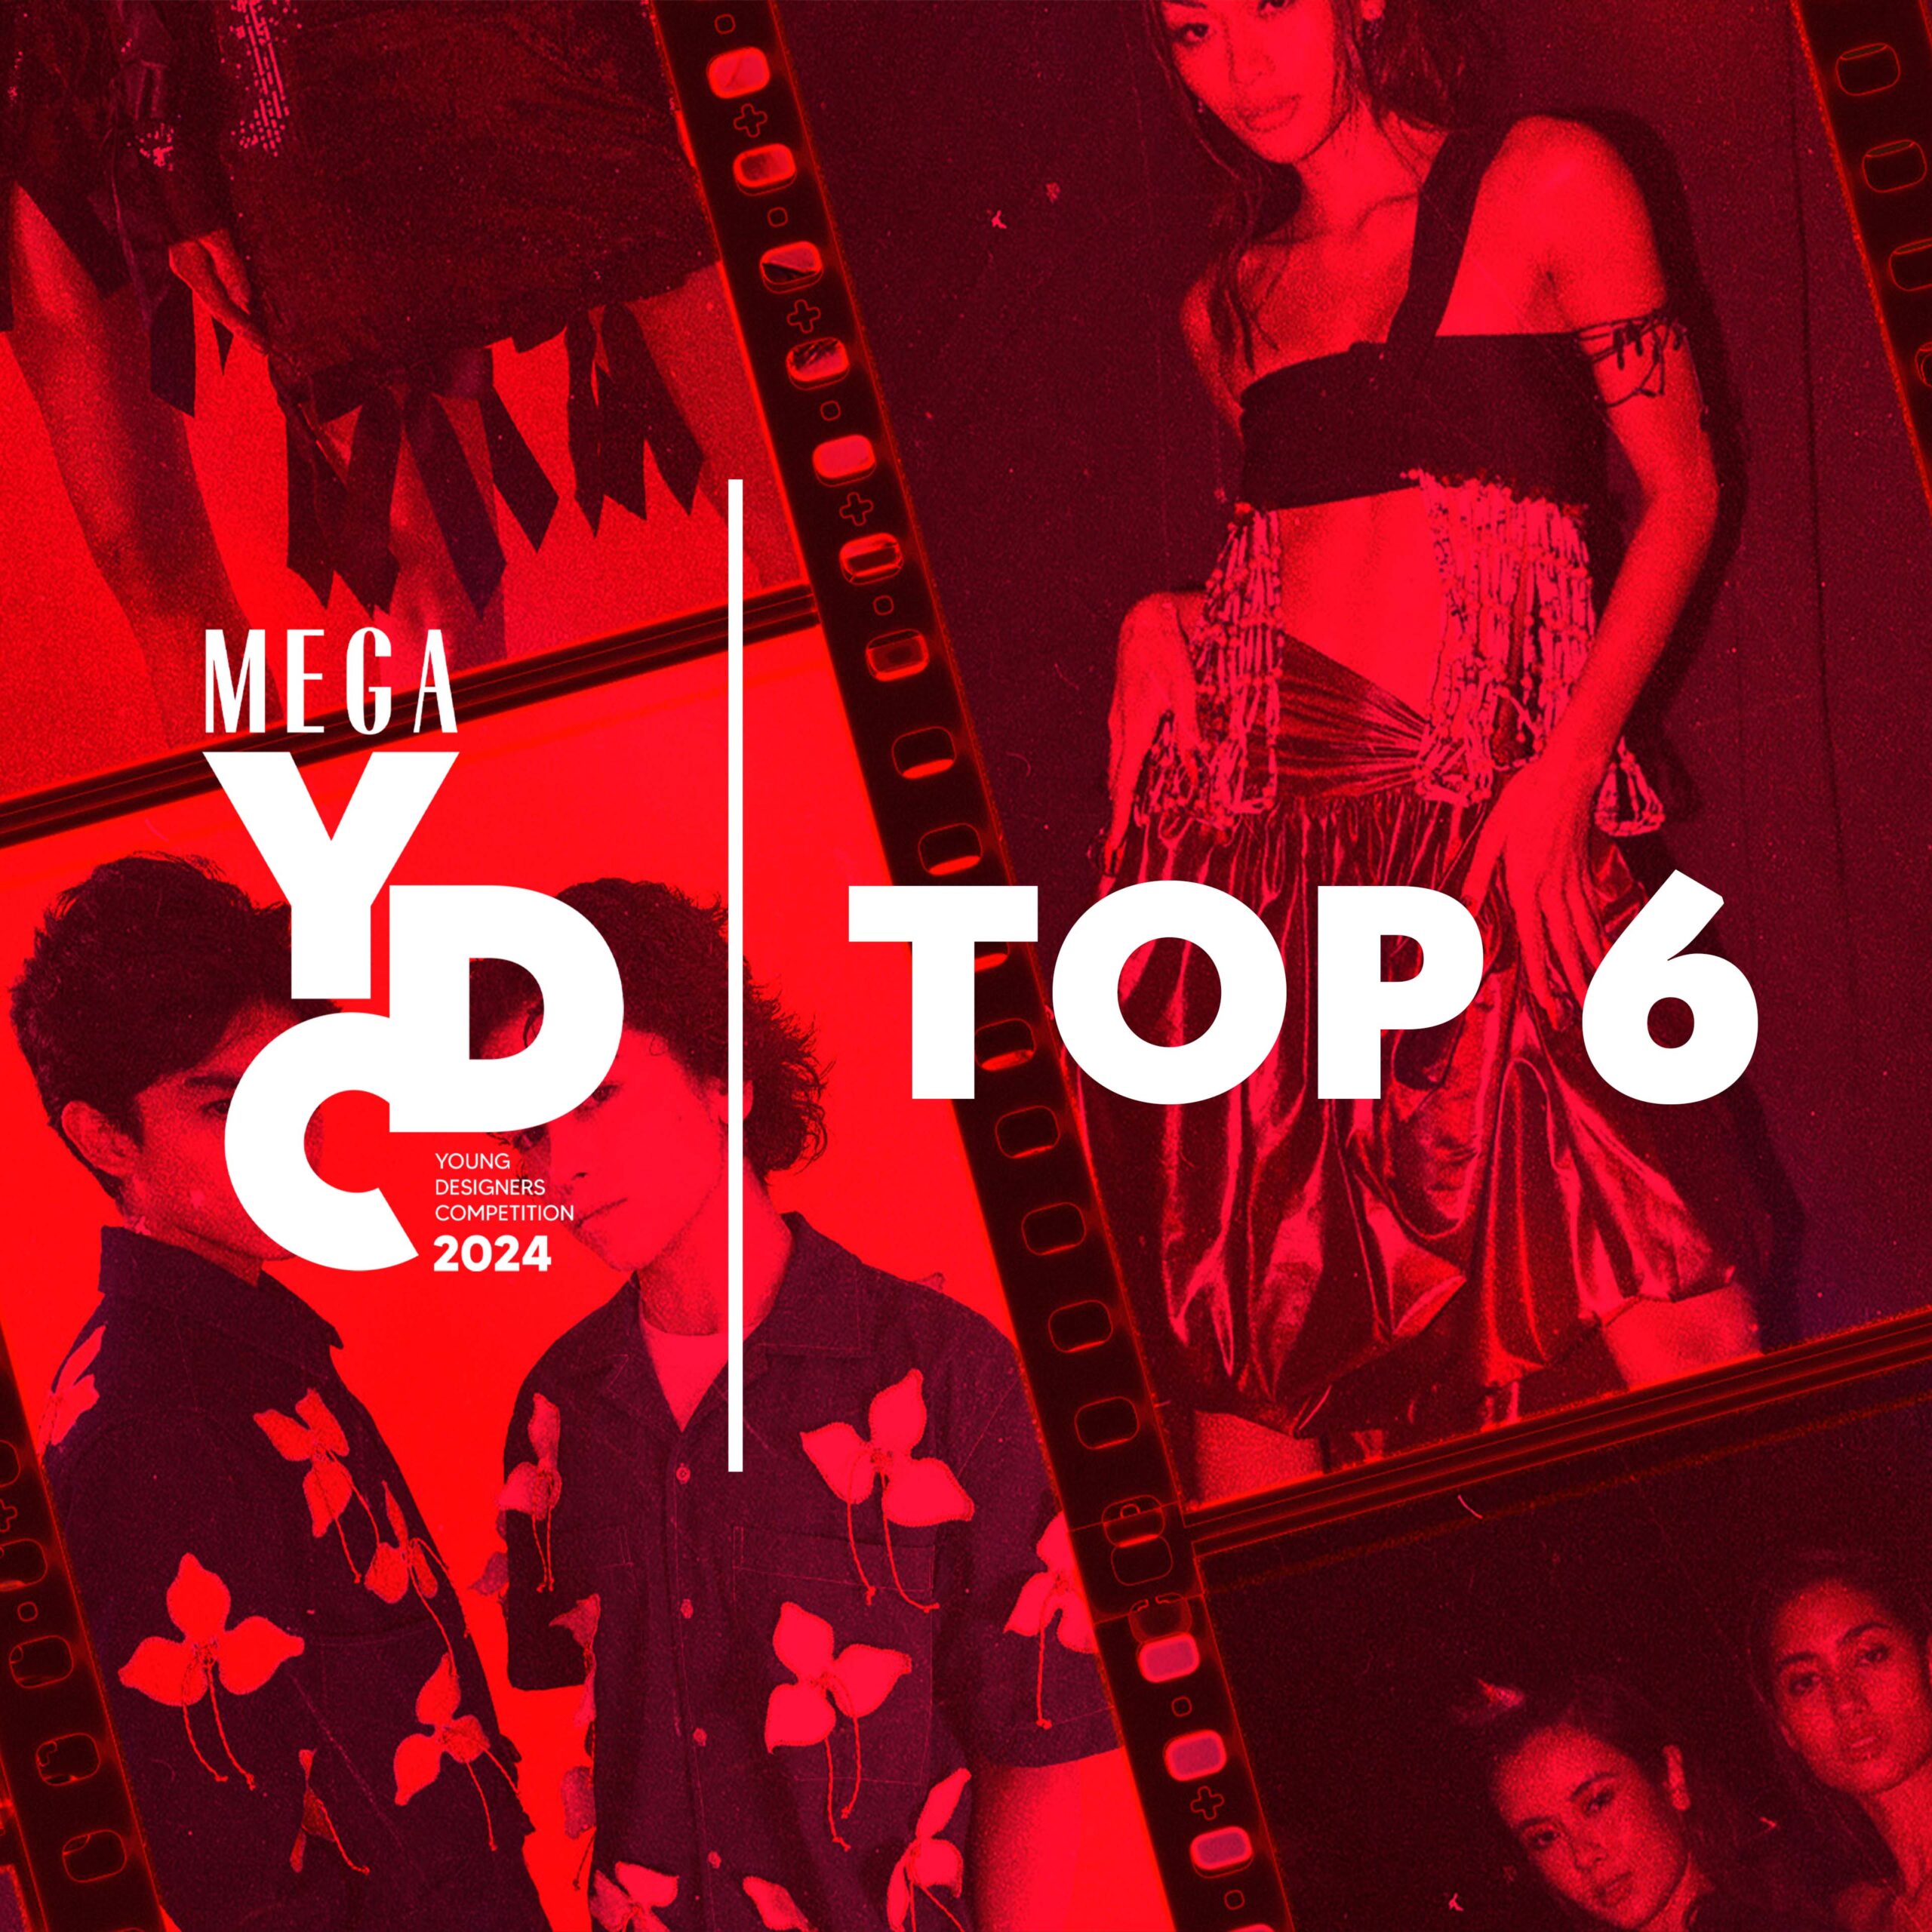 MEGA Young Designers Competition 2024: Top 6 Finalists